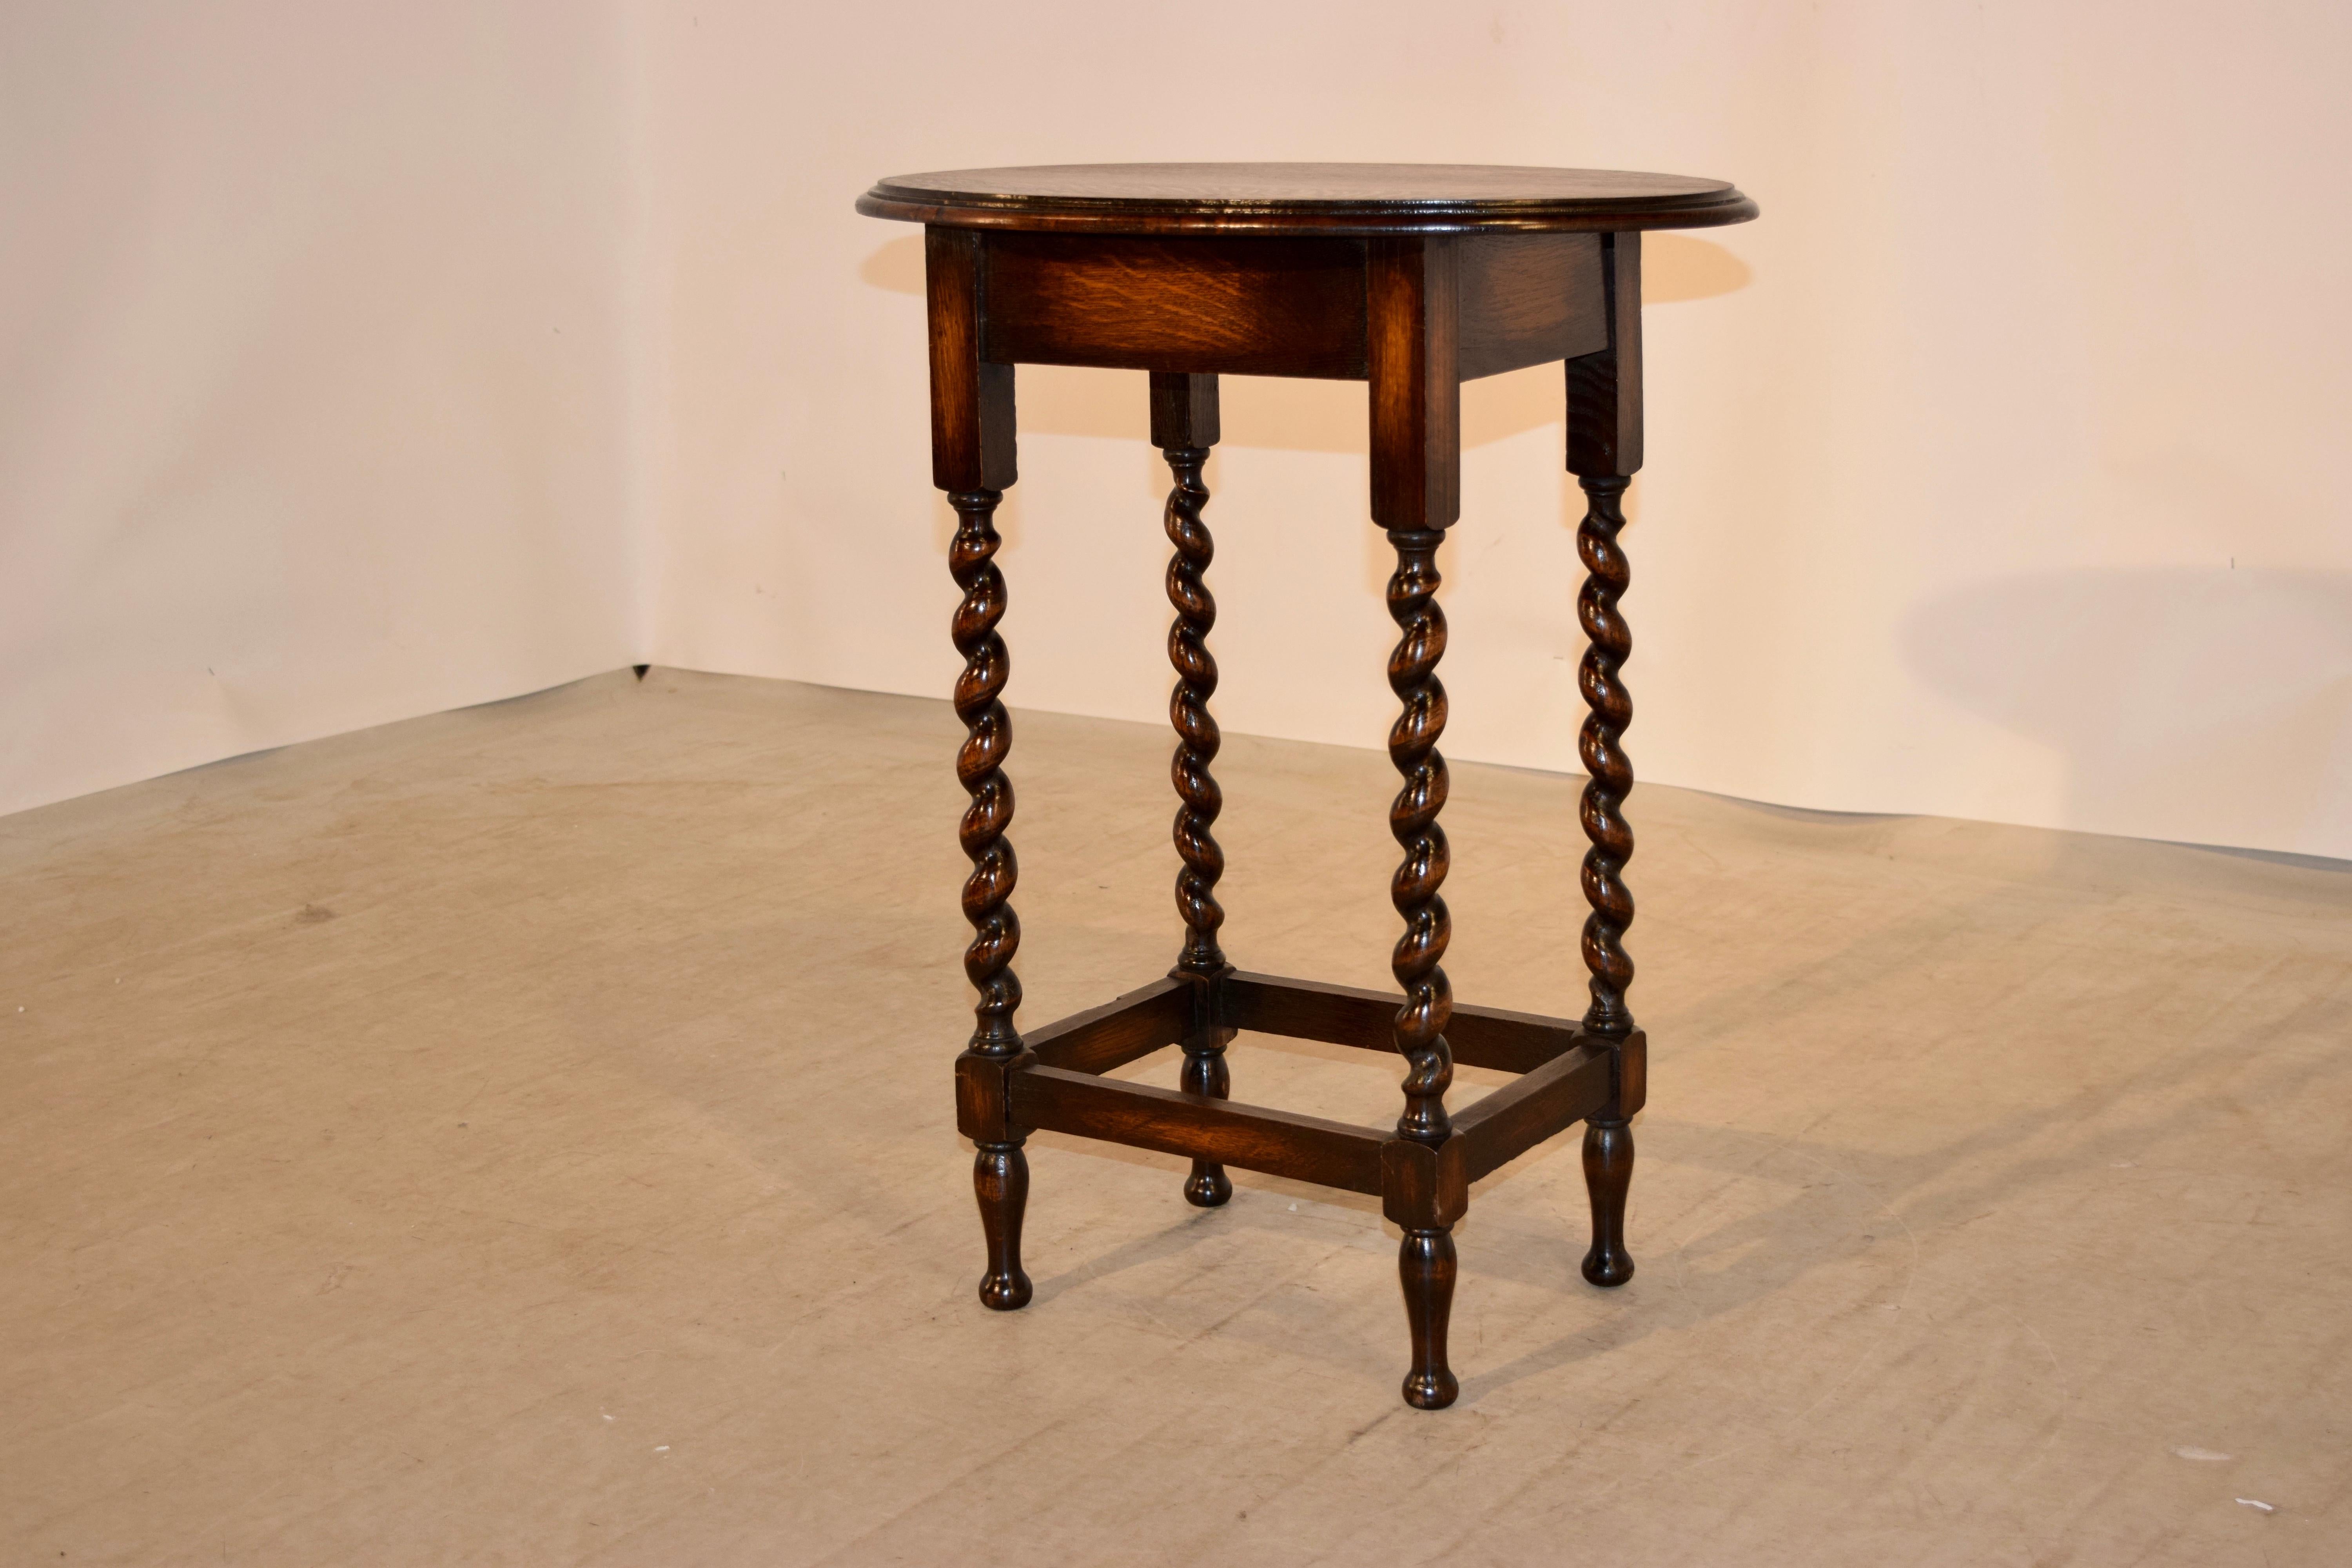 English oak side table with an oval top which has a beveled edge following down to a simple apron and supported on hand turned barley twist legs, joined by stretchers and raised on hand turned feet, circa 1900.